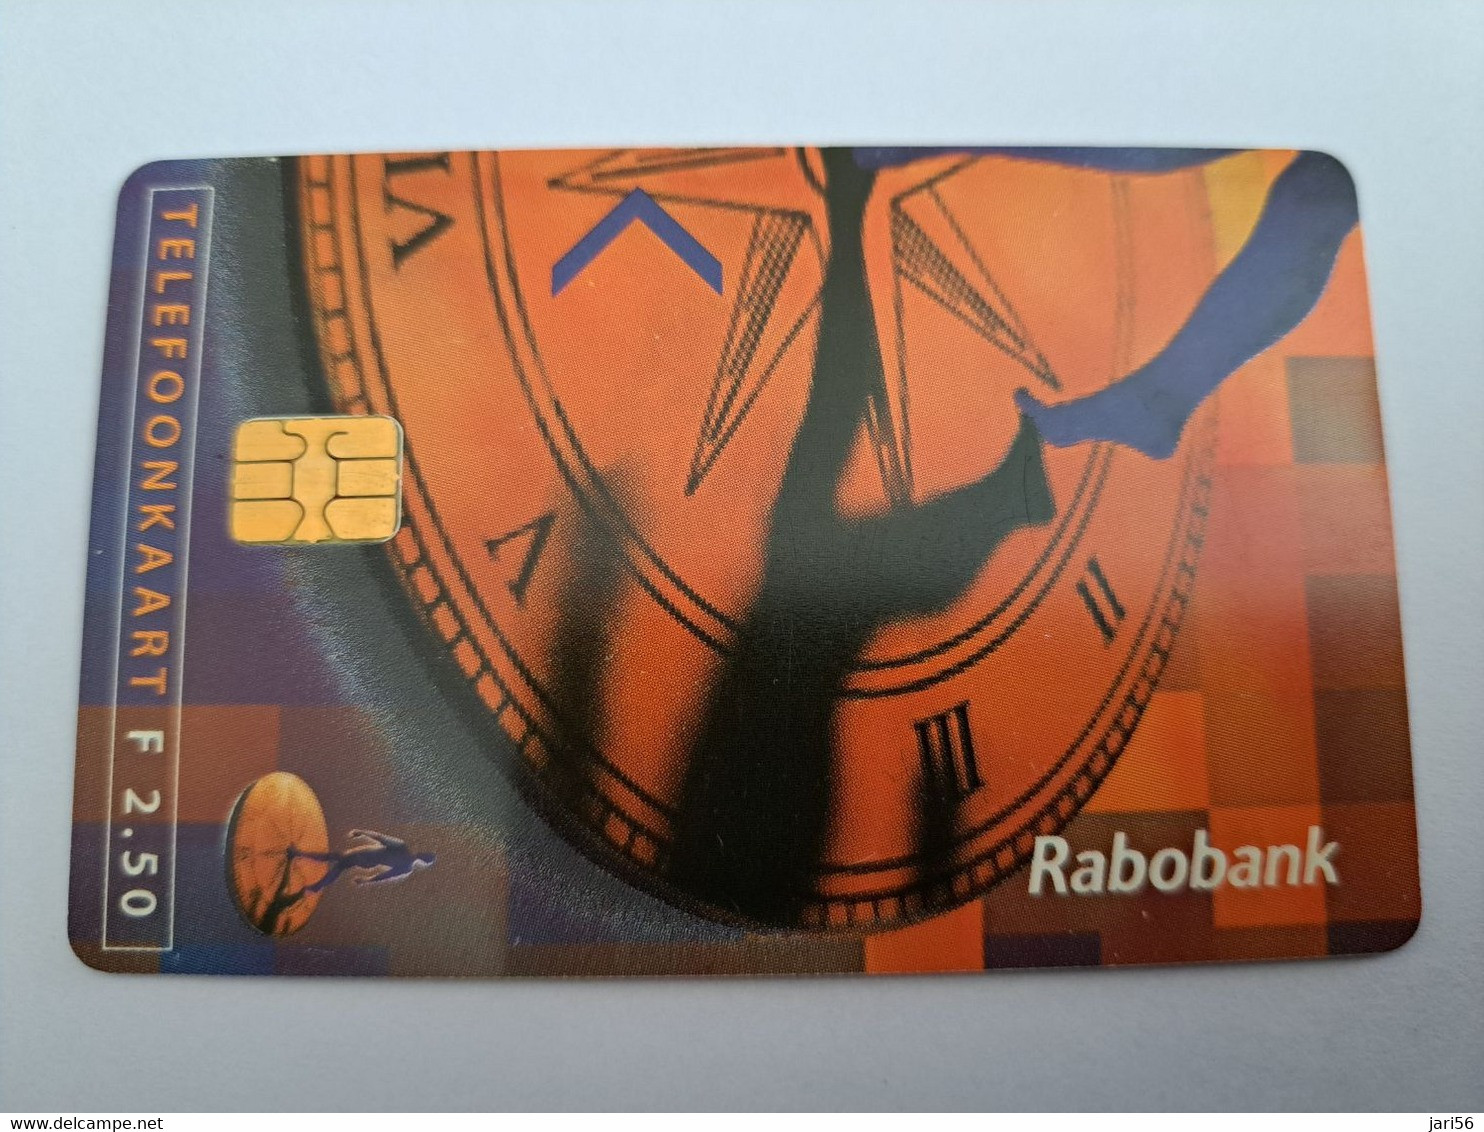 NETHERLANDS CHIPCARD    RABO BANK   / CRD 132/04   / HFL 2,50 PRIVATE /  /  MINT   ** 10751** - Publiques